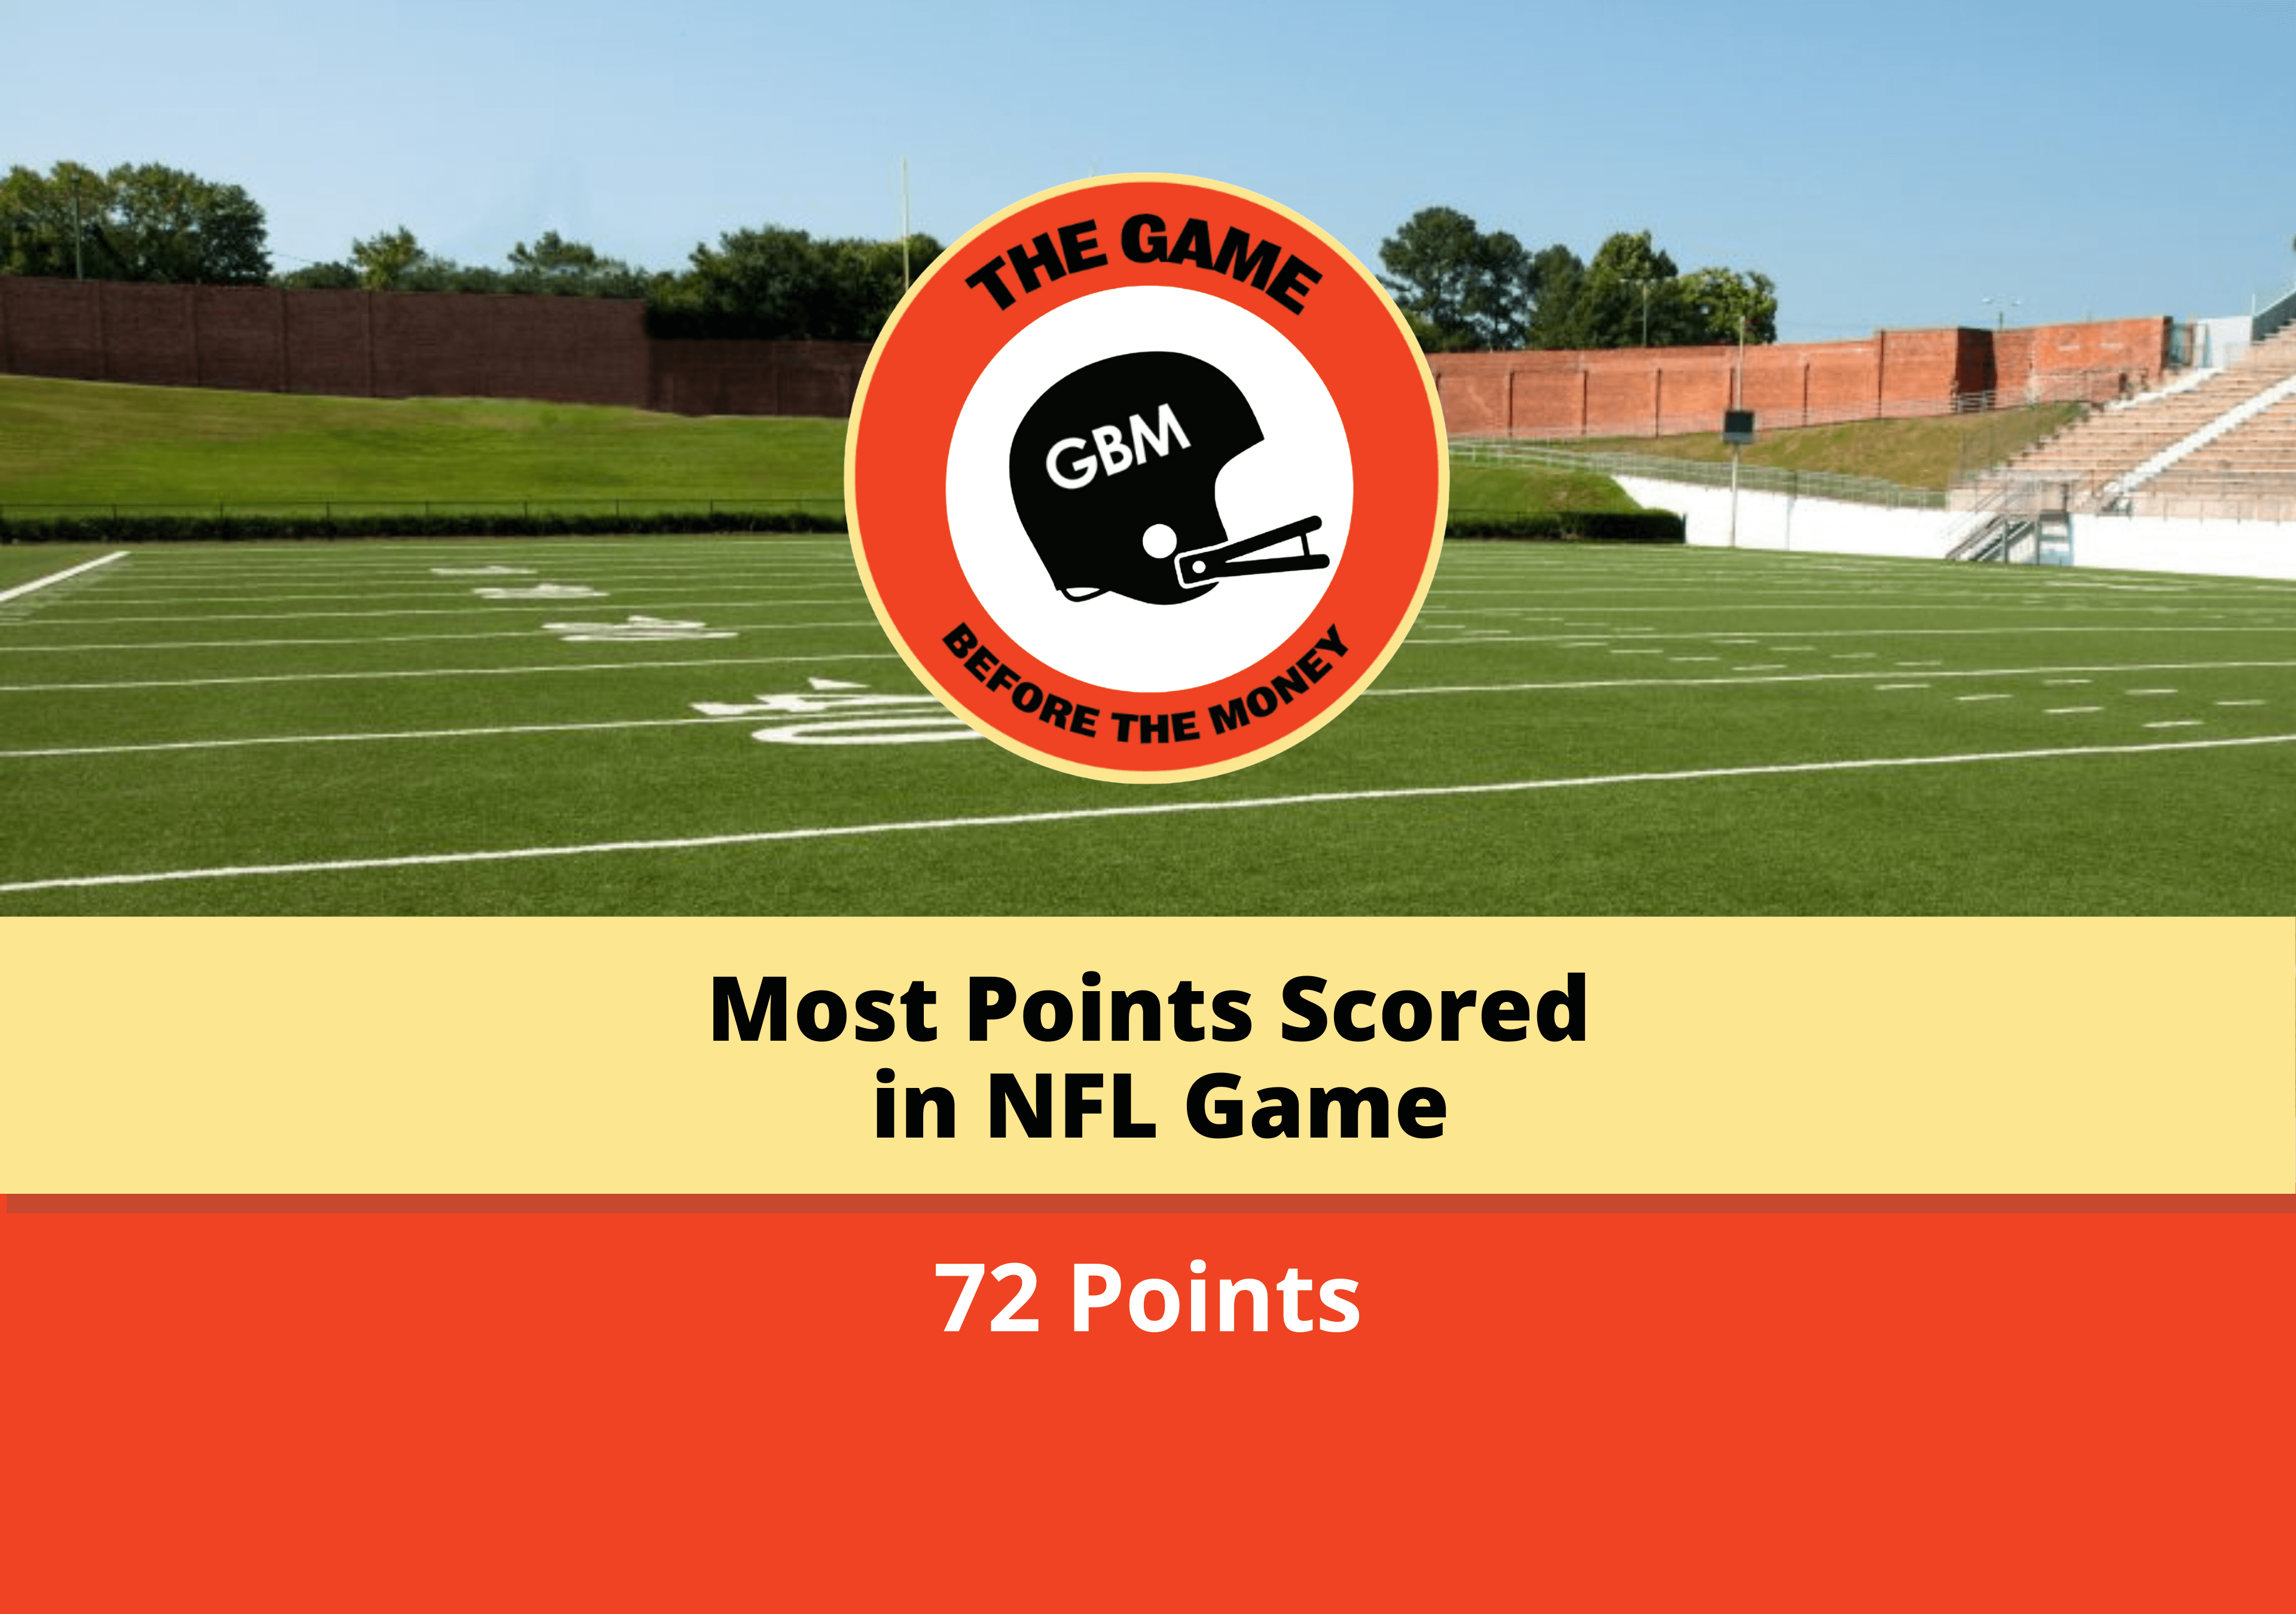 Photo: most points by one team in nfl